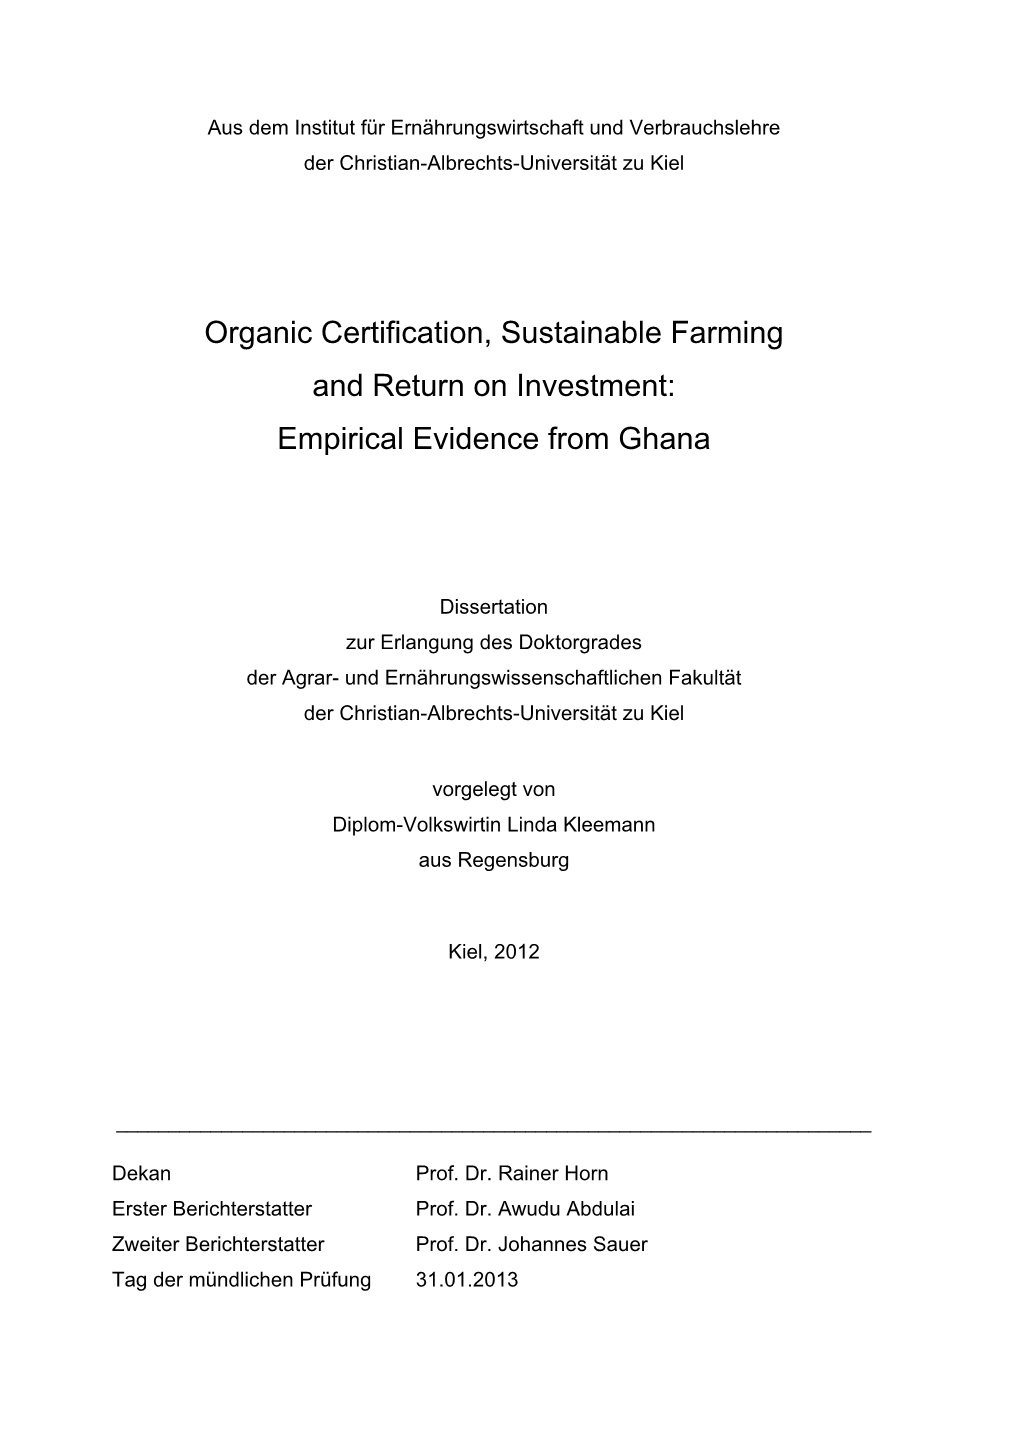 Organic Certification, Sustainable Farming and Return on Investment: Empirical Evidence from Ghana